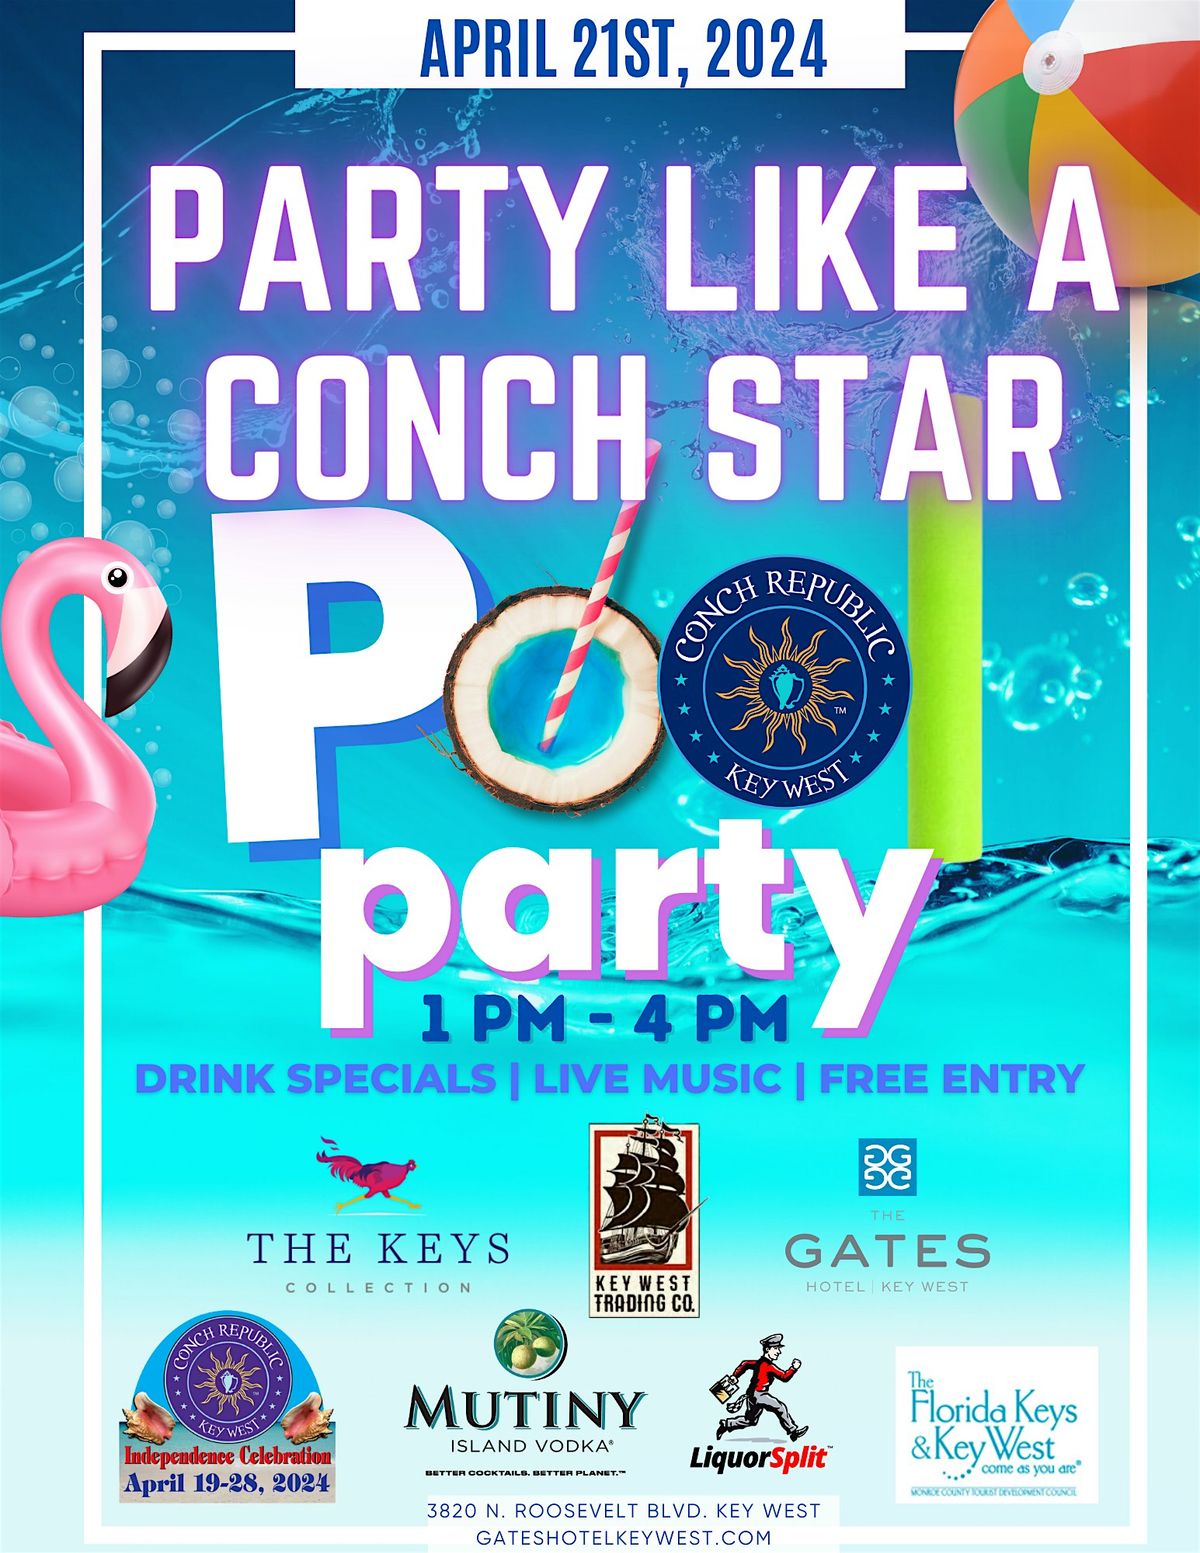 Party Like A Conch Star!